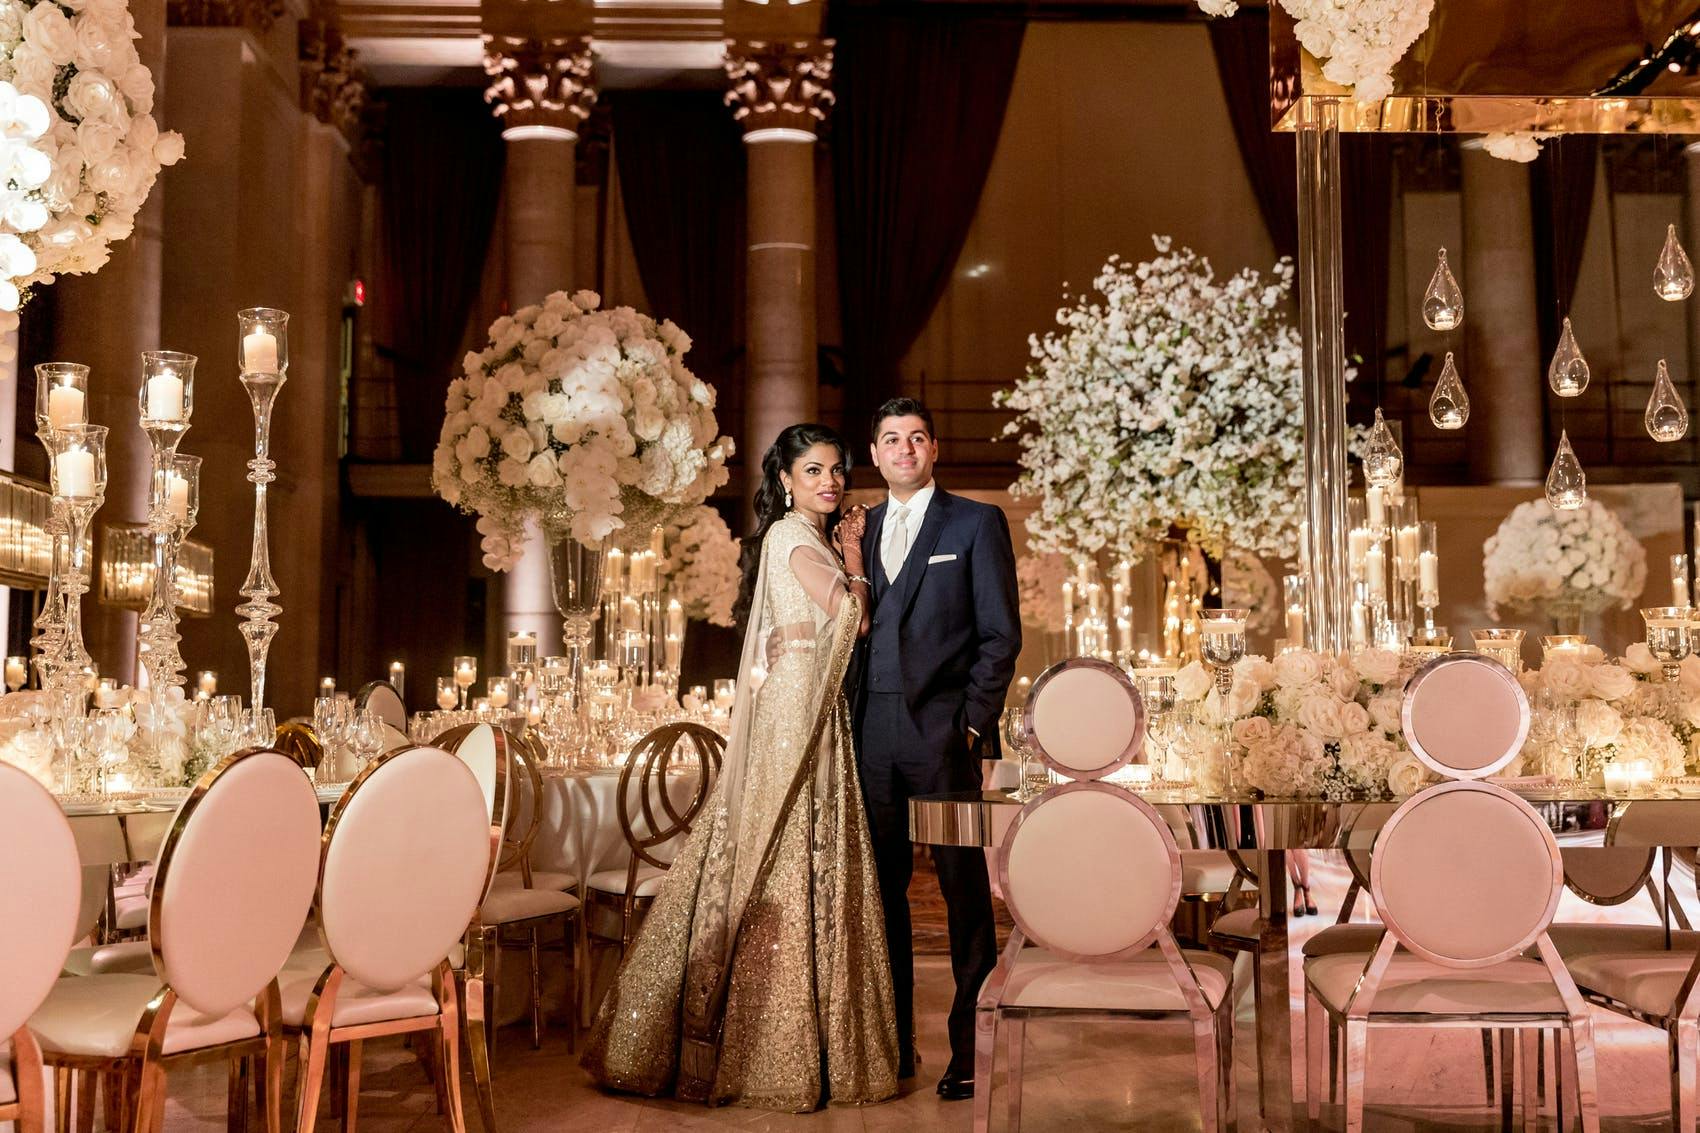 A husband and wife stand between white tables with pink chairs and large white bouquets.